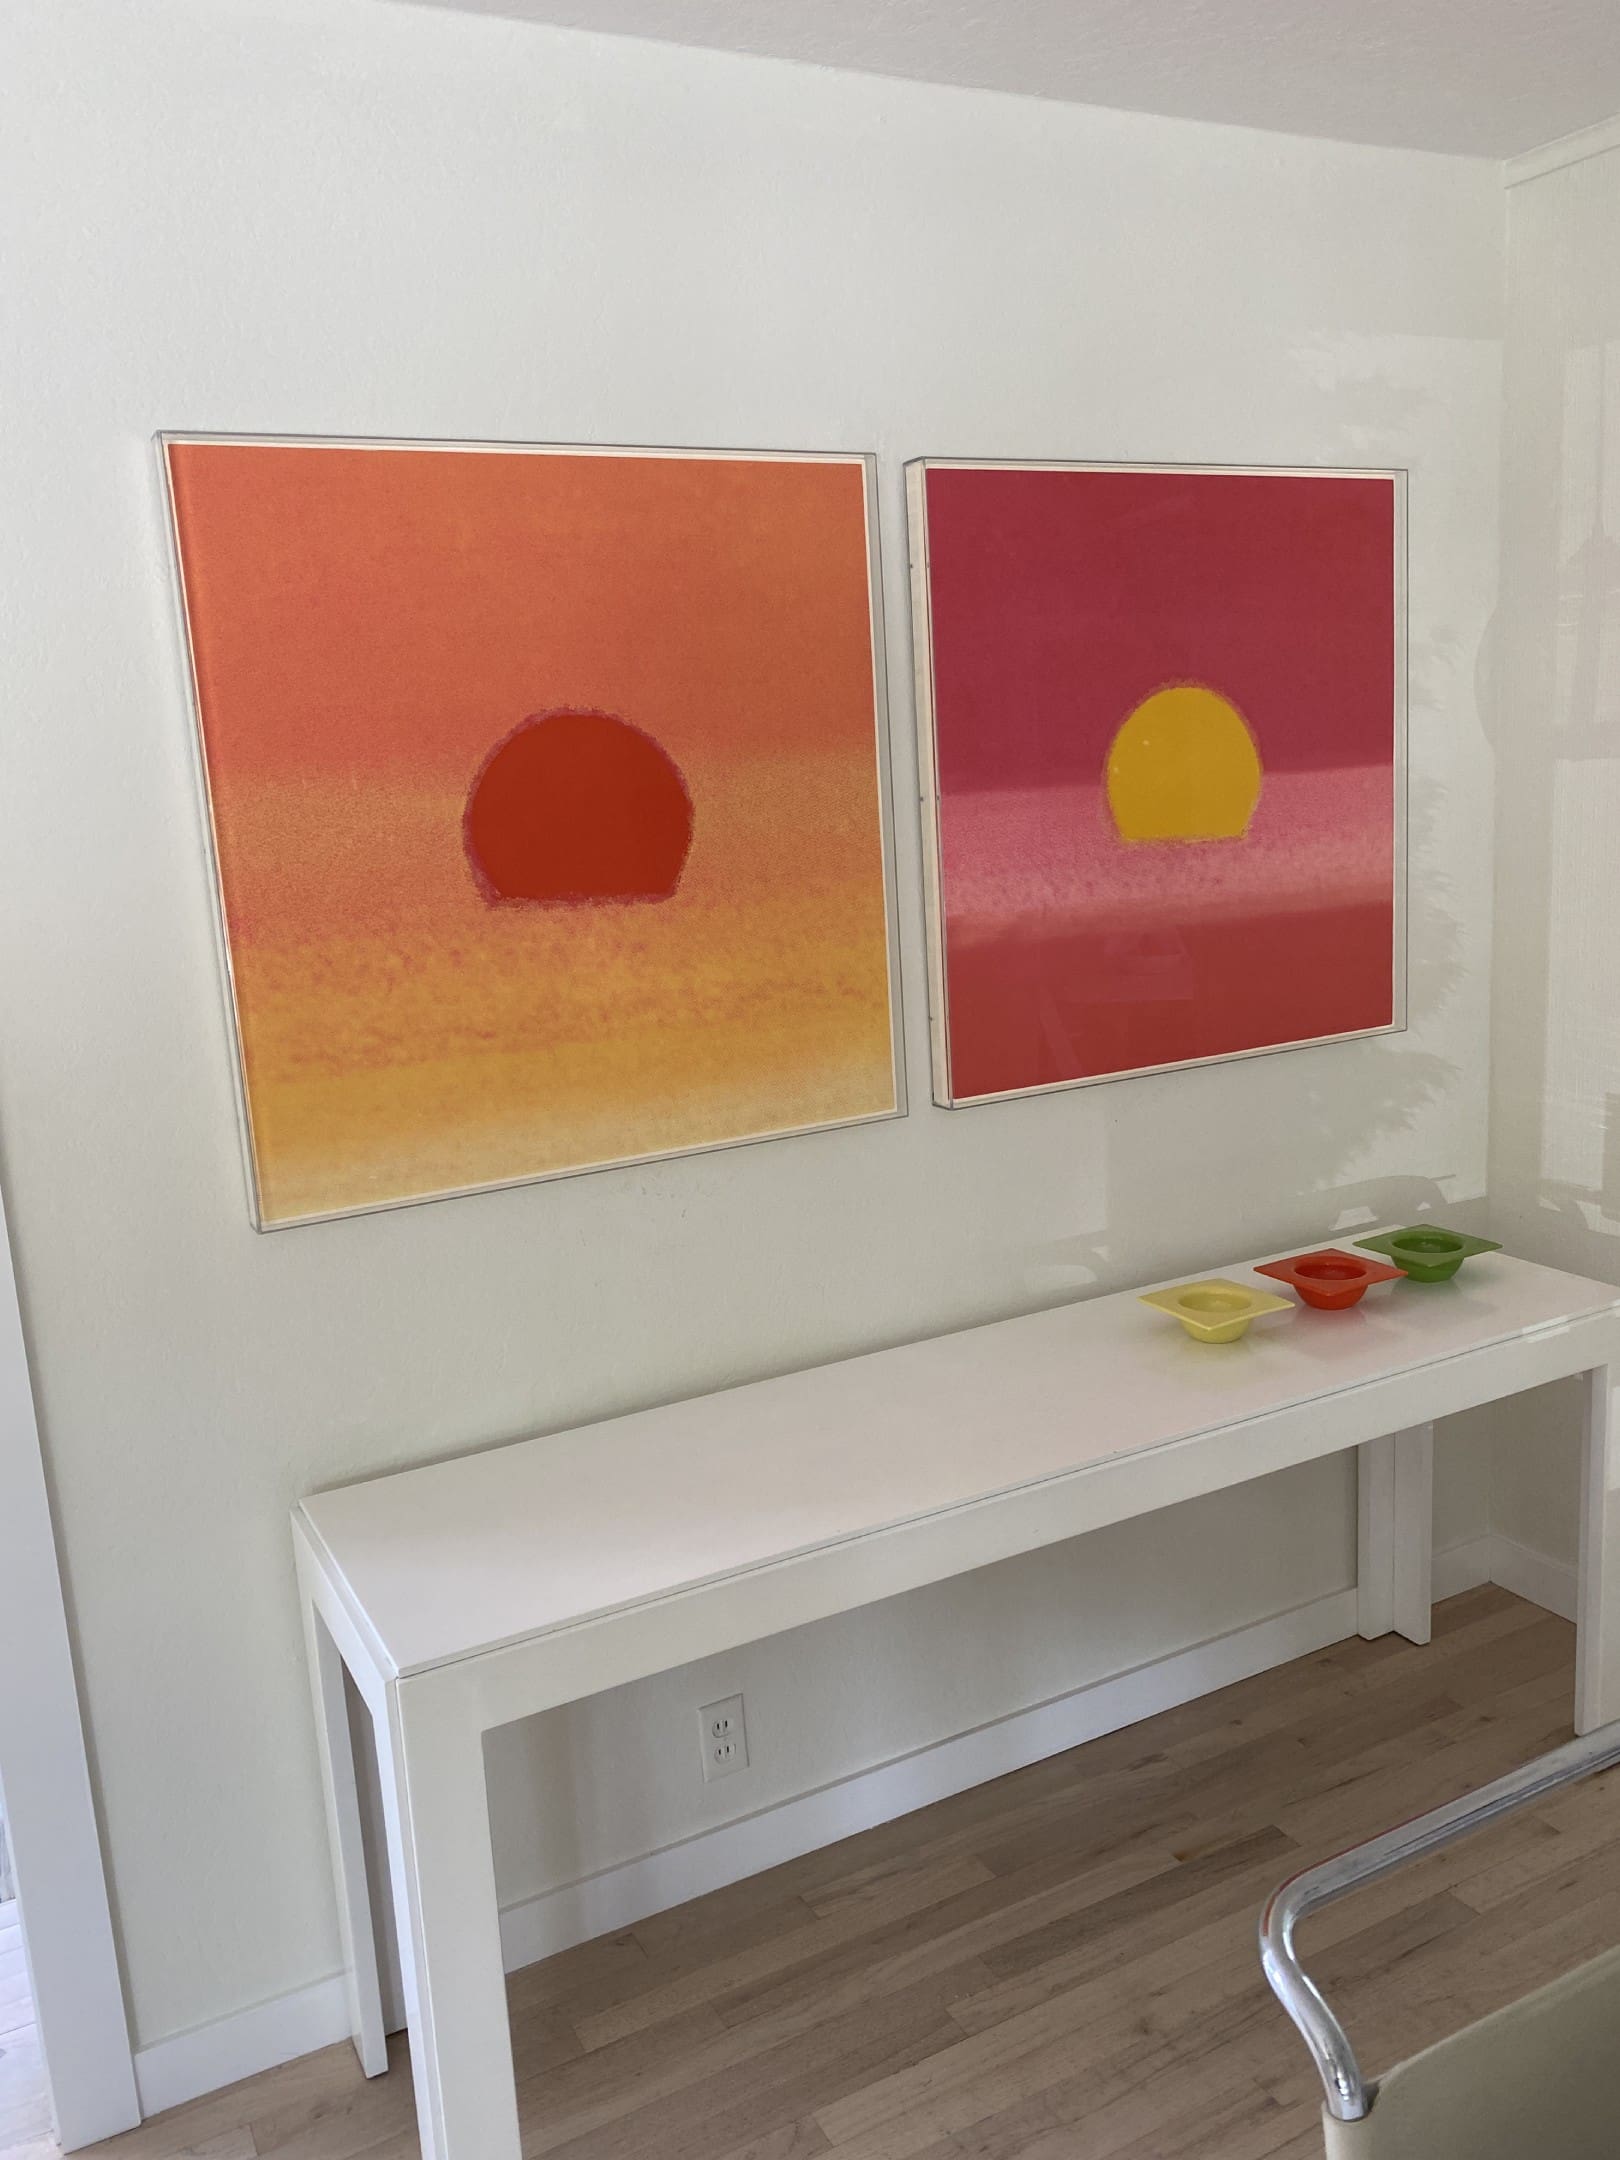 Two paintings of the sun on a wall